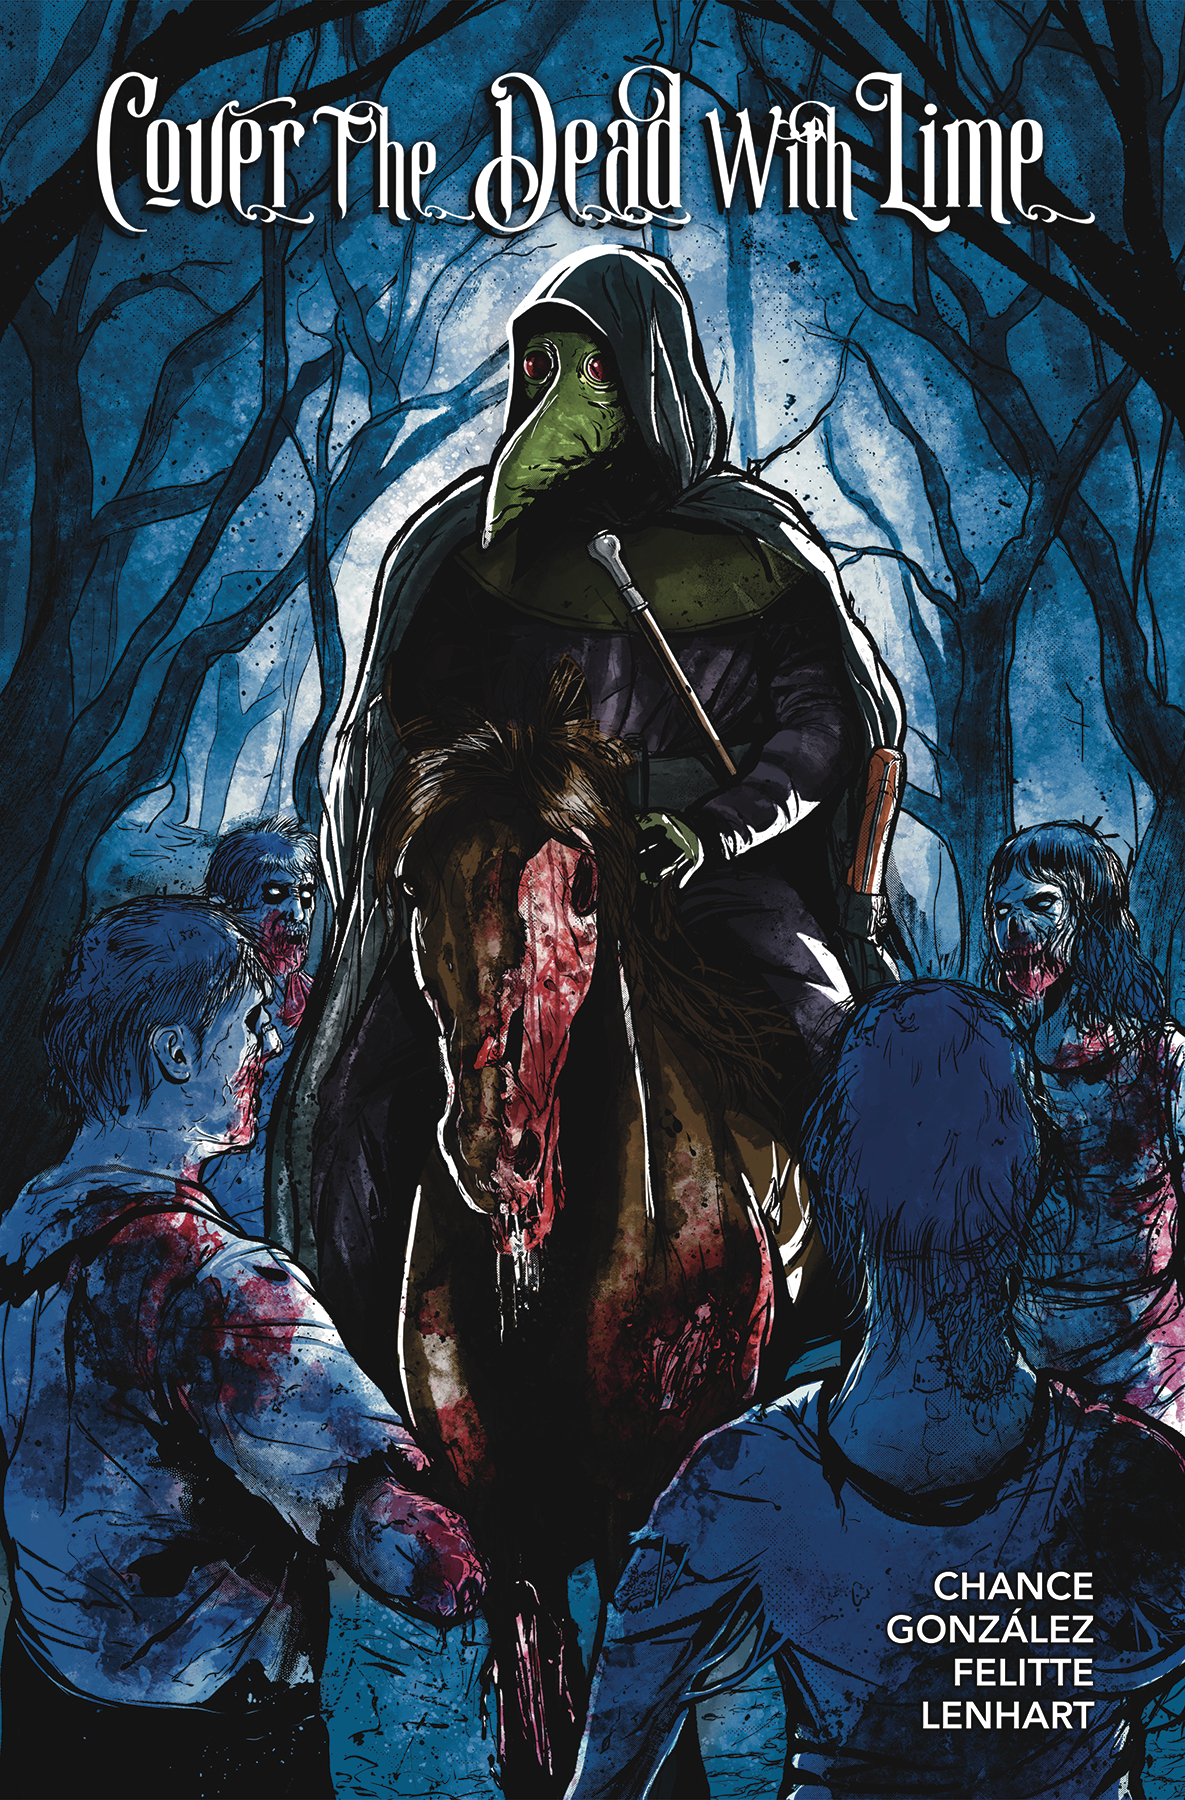 Cover The Dead With Lime #3 Cover A Hernan Gonzalez